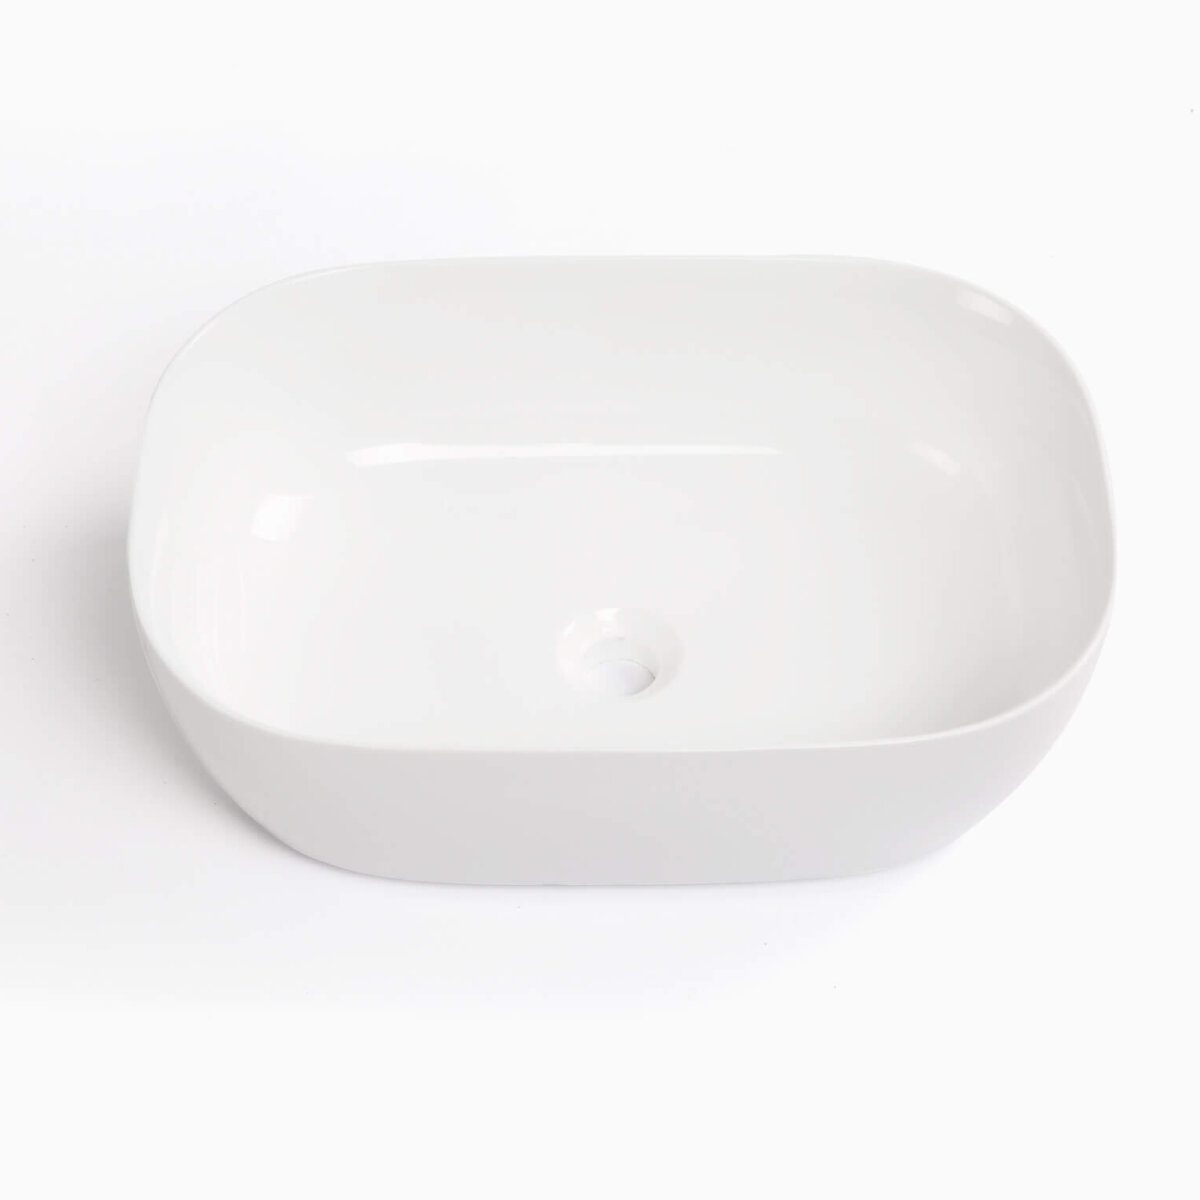 Clear Cube Barcelona Vanity Basin 500x345x160mm_Stiles_Product_Image2